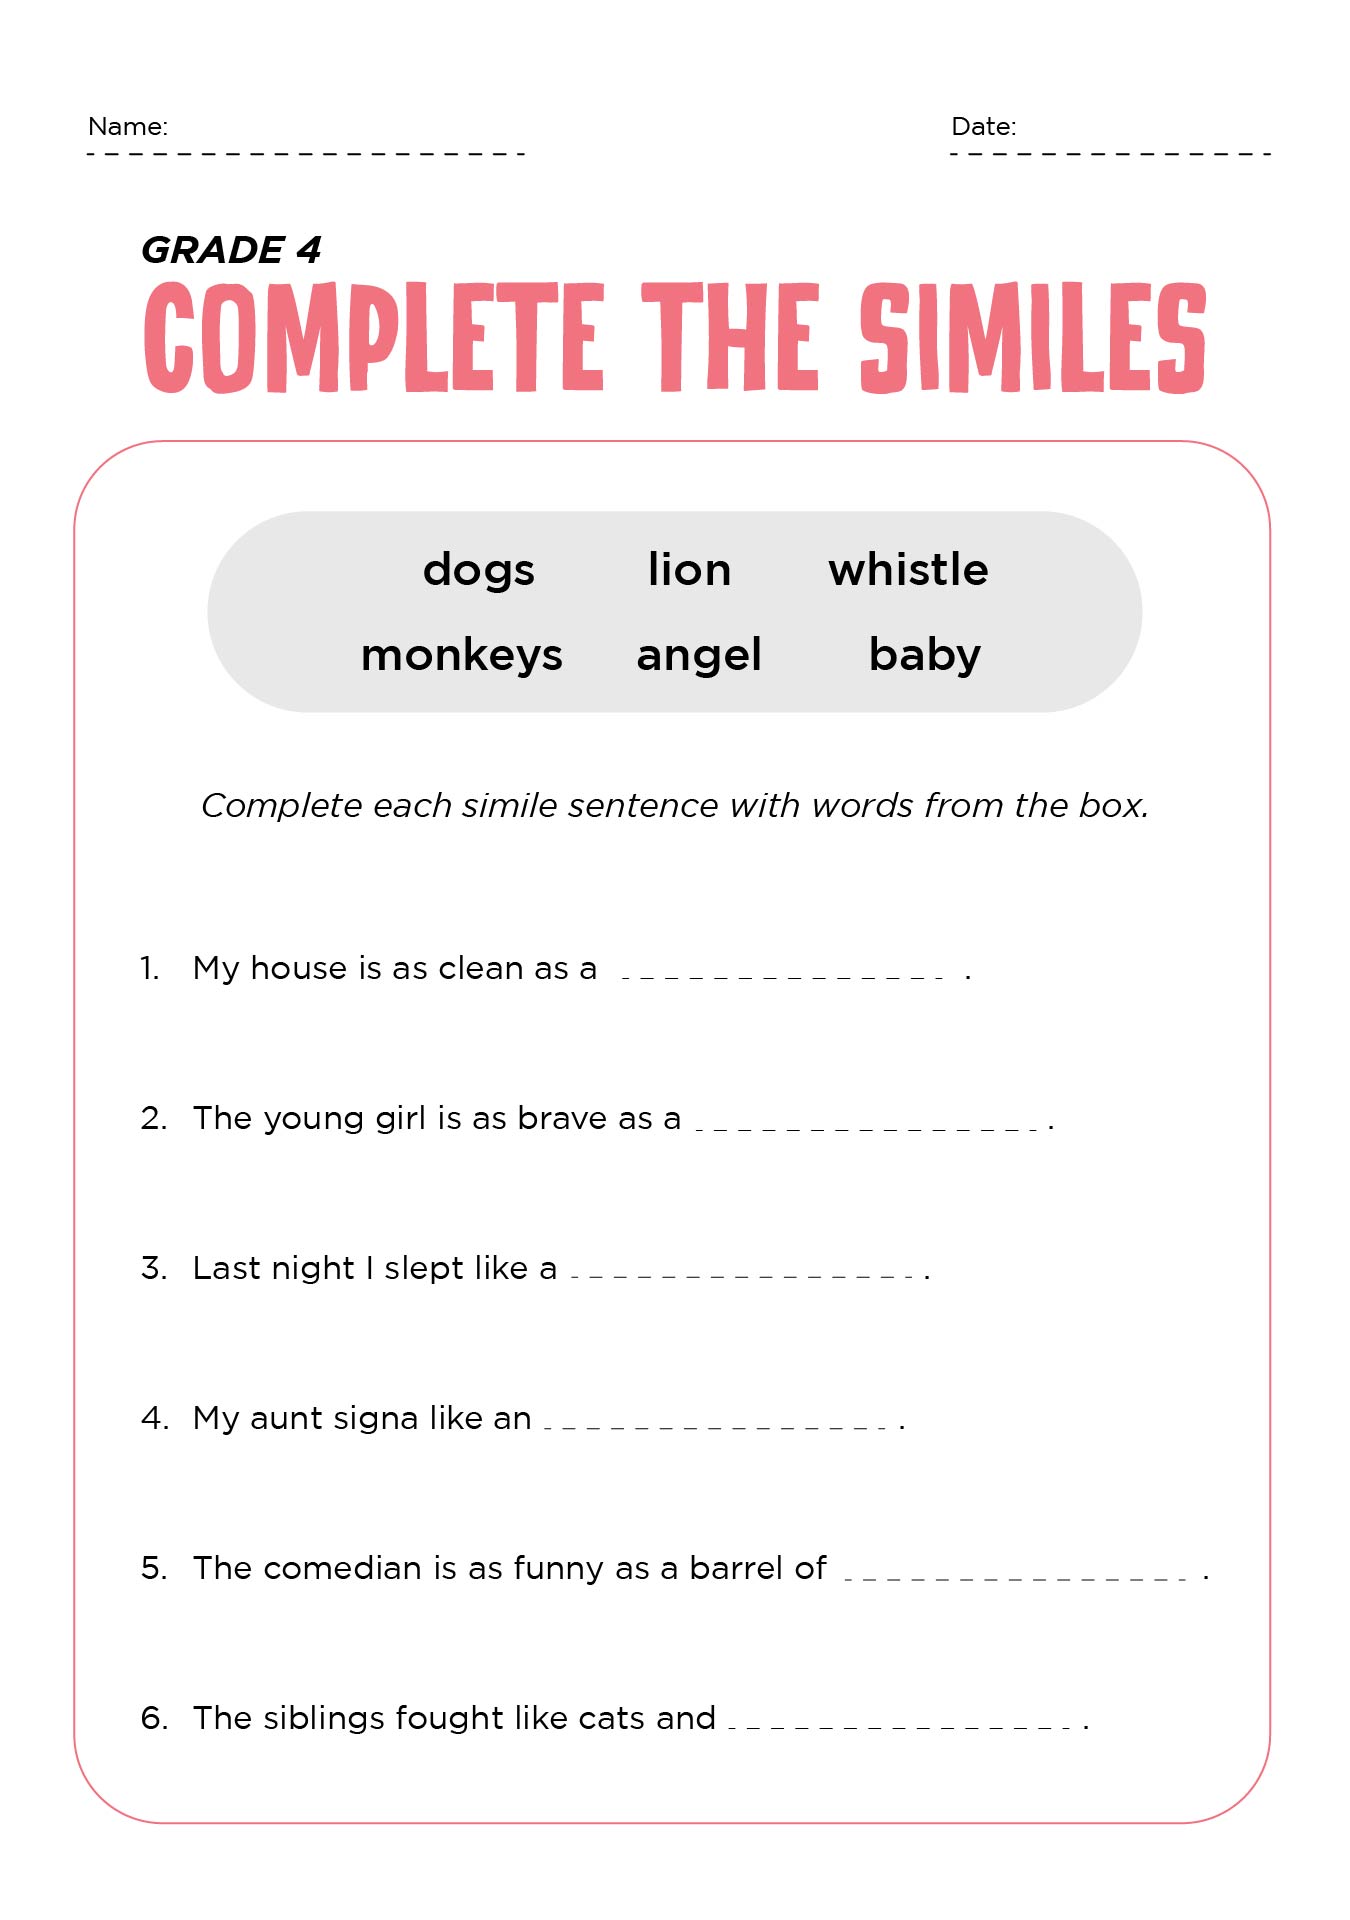 5-best-images-of-4th-grade-grammar-printable-synonyms-and-antonyms-worksheets-4th-grade